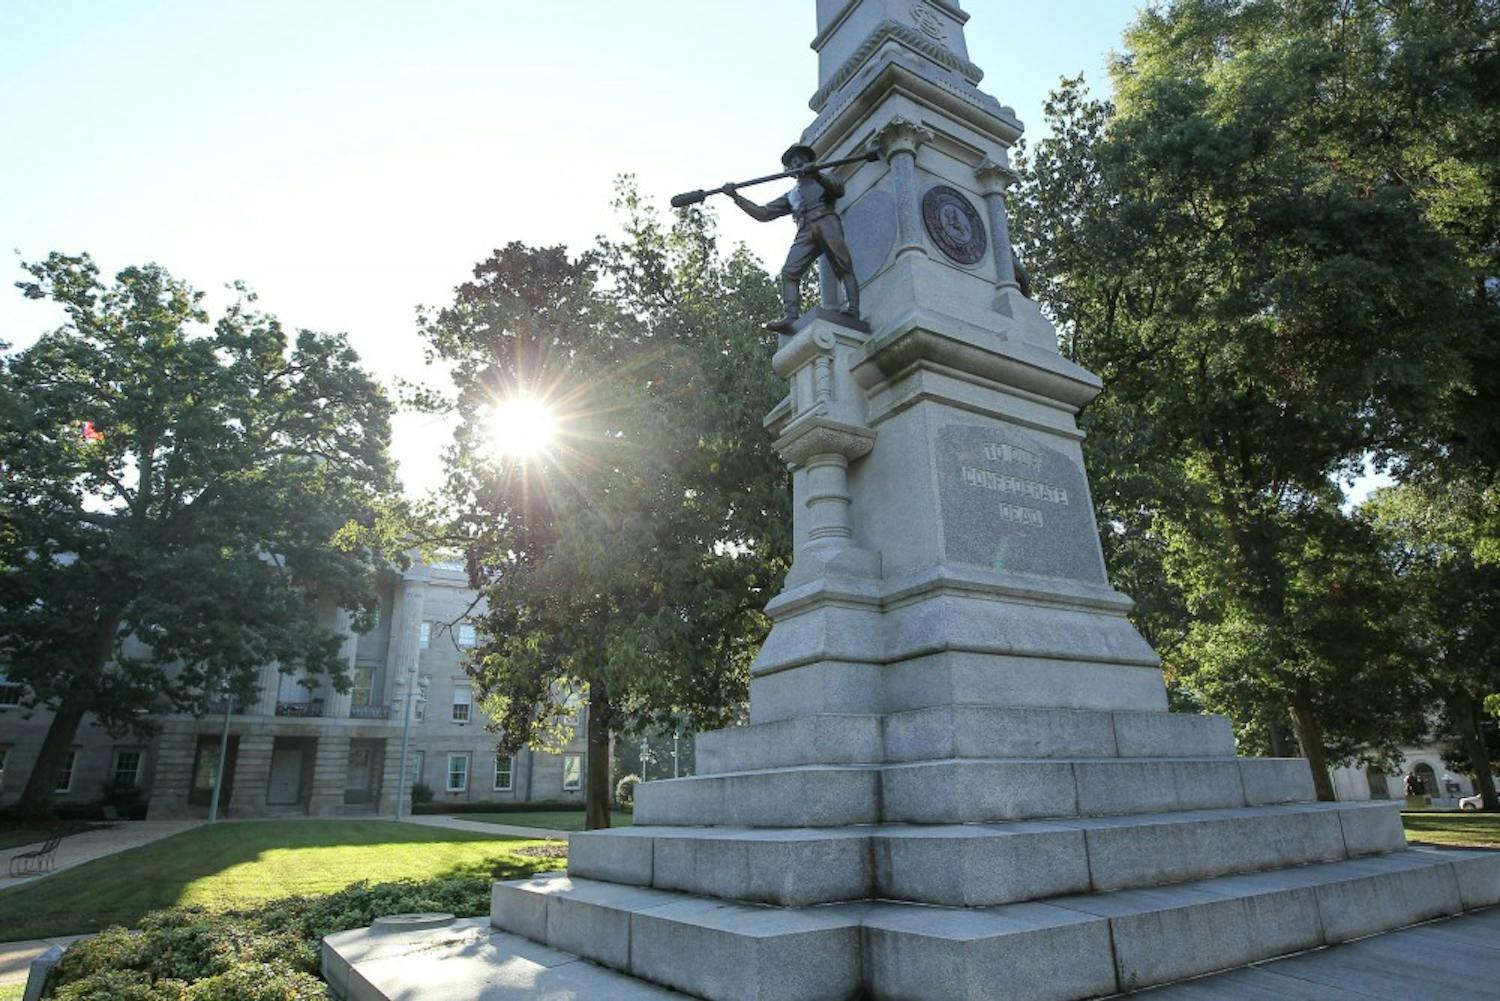 Three Confederate statues on North Carolina's old Capitol Grounds in Raleigh, NC are under consideration for relocation.